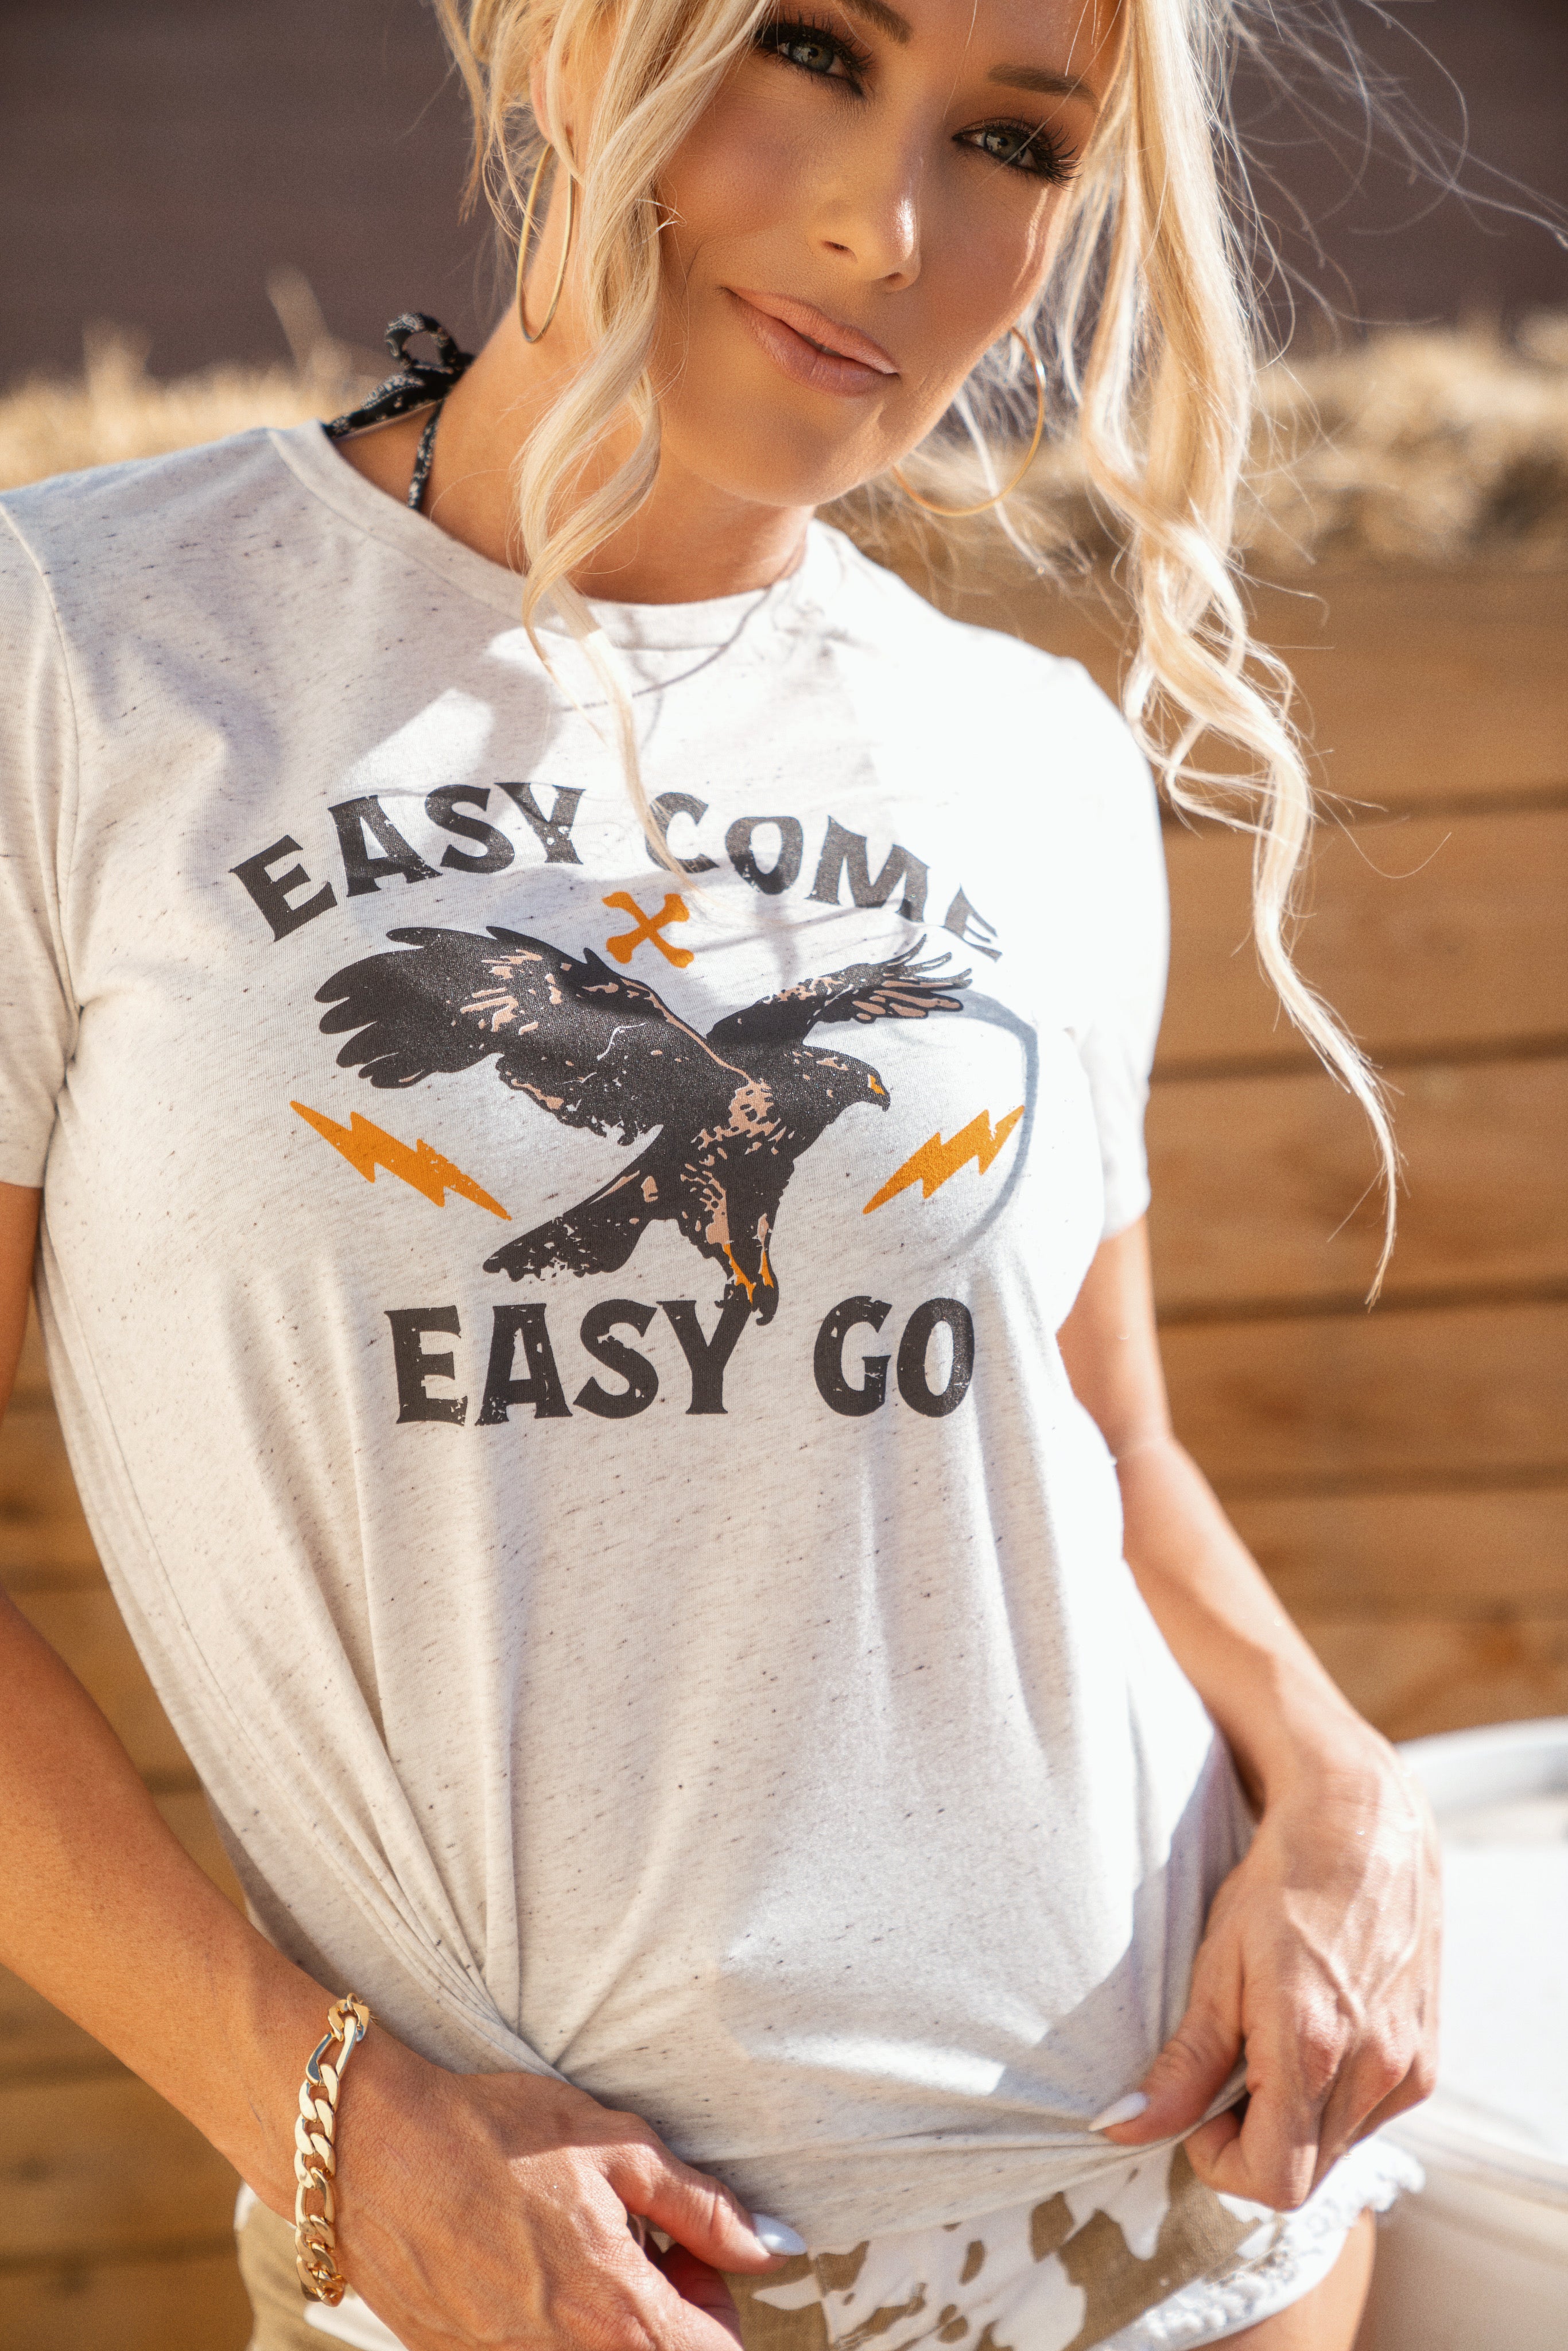 EASY COME, EASY GO graphic tee